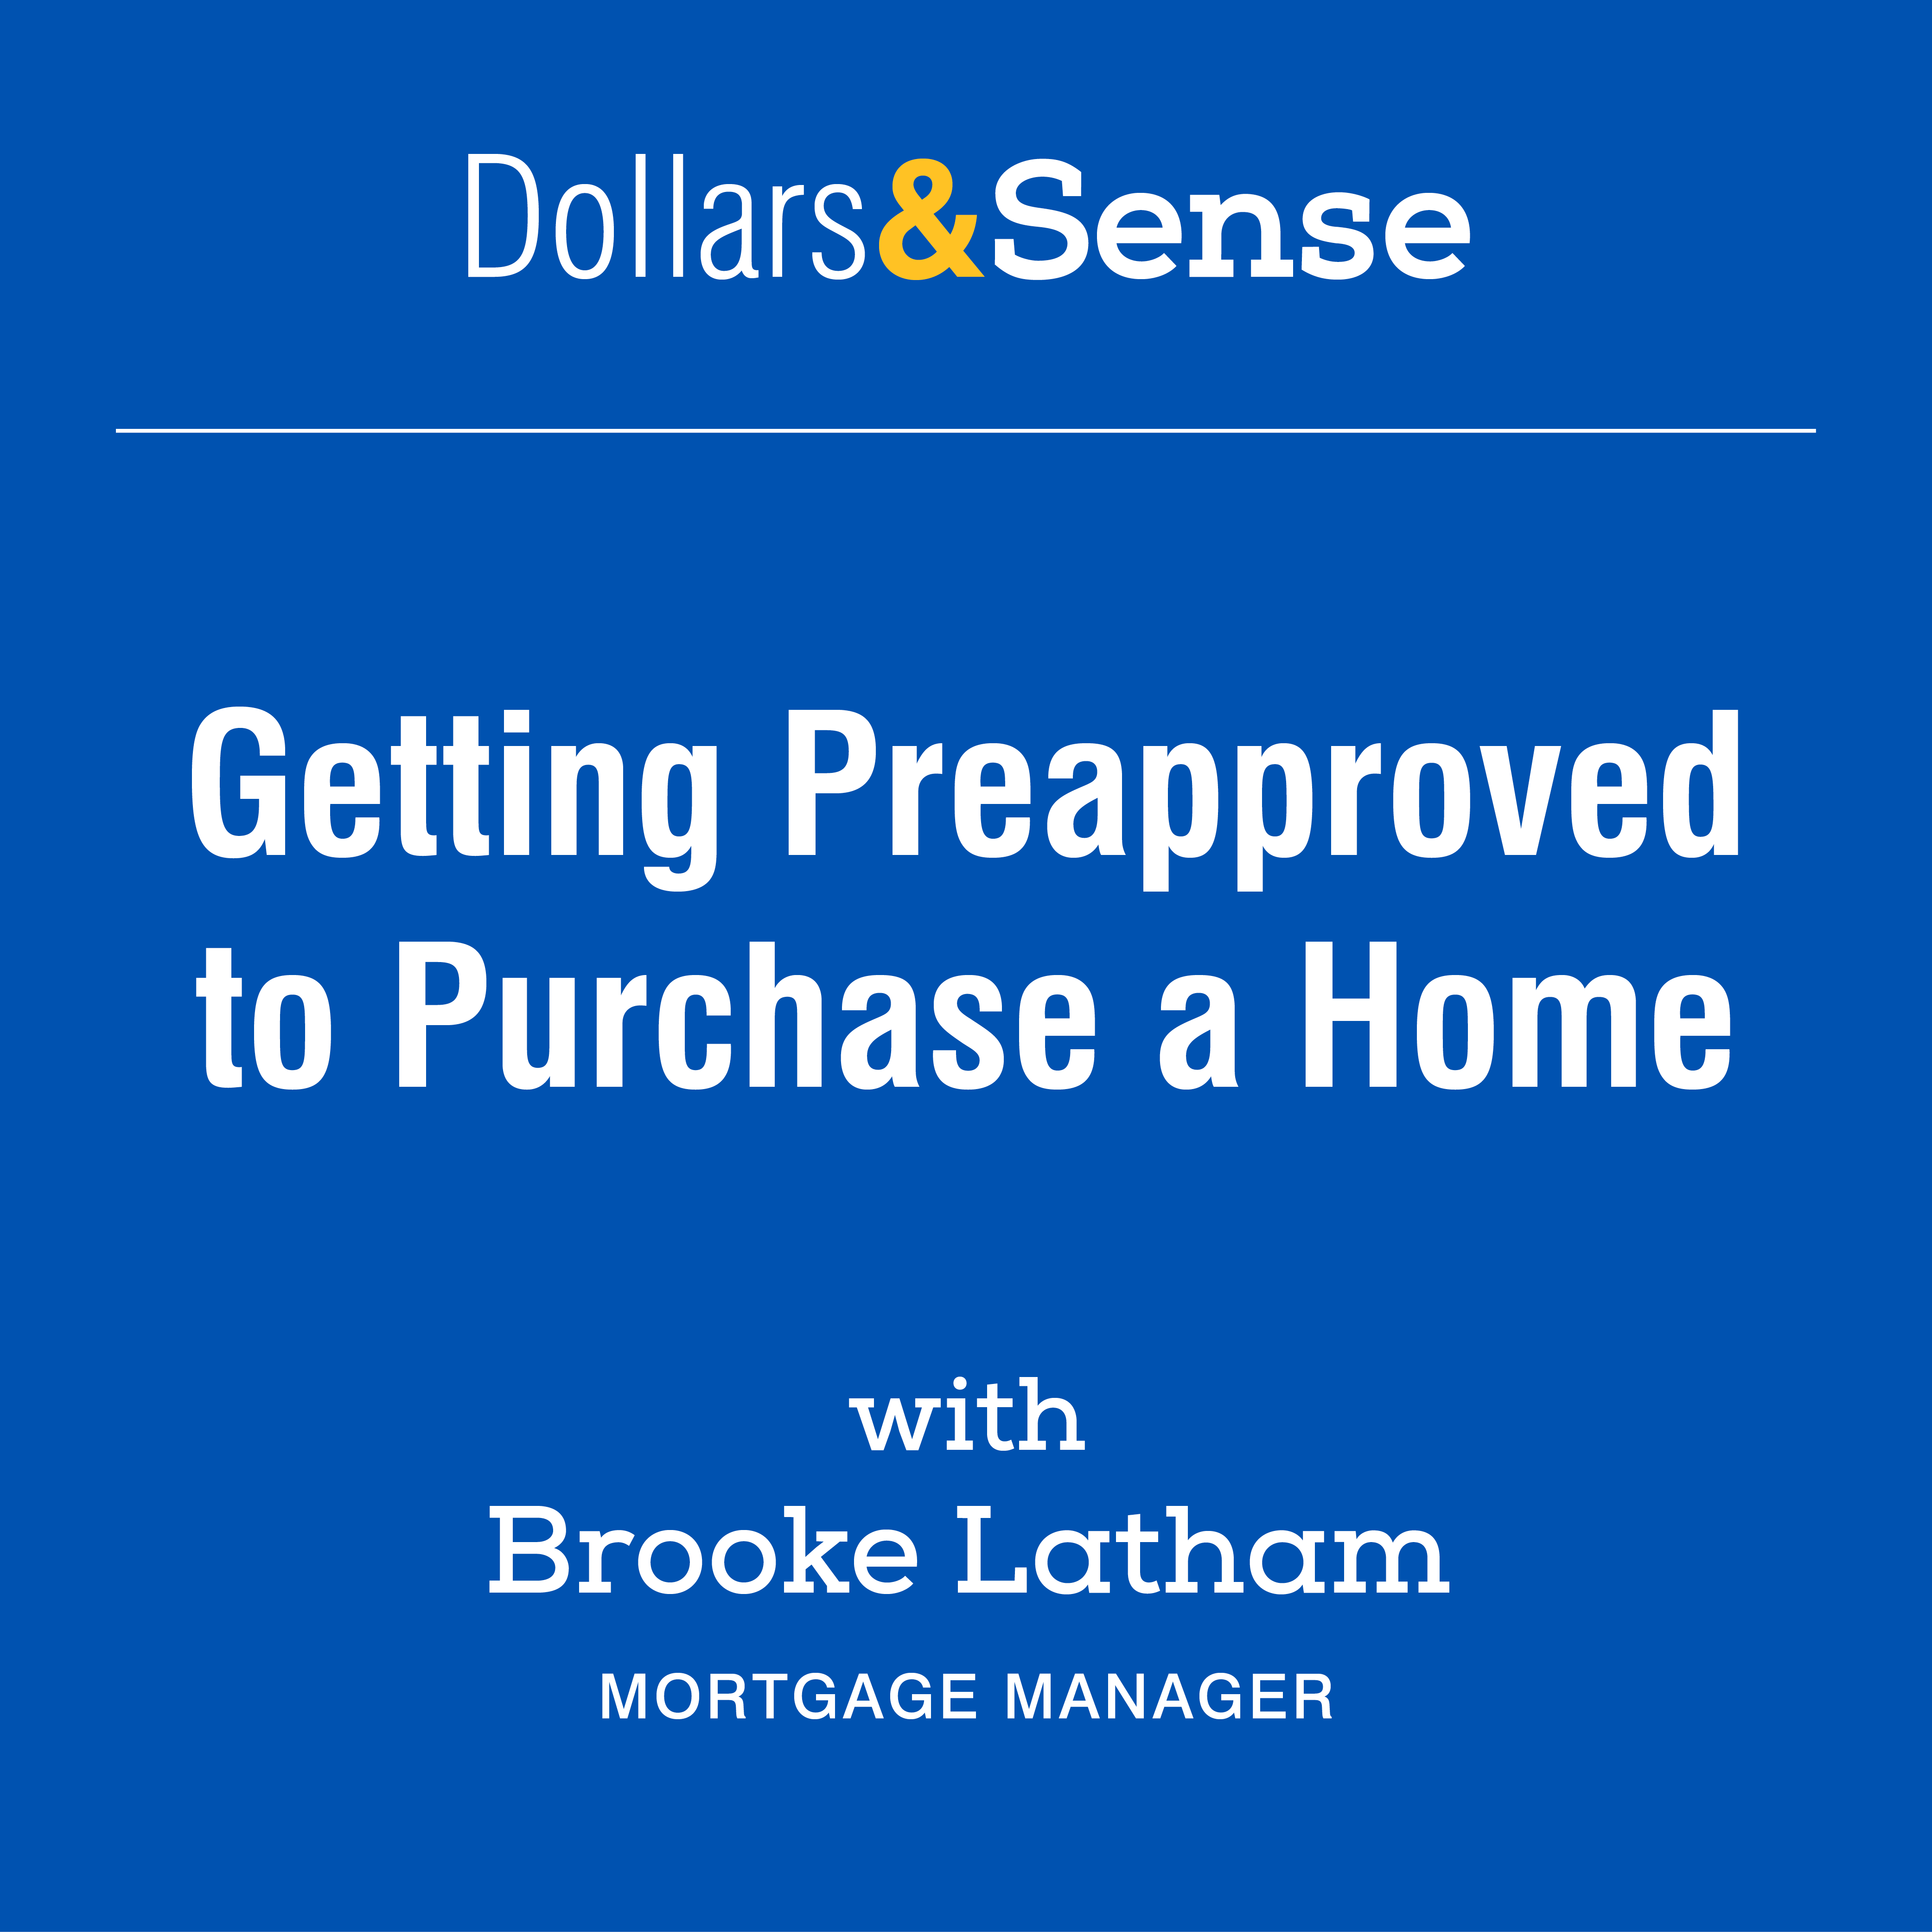 Getting Preapproved to Purchase a Home